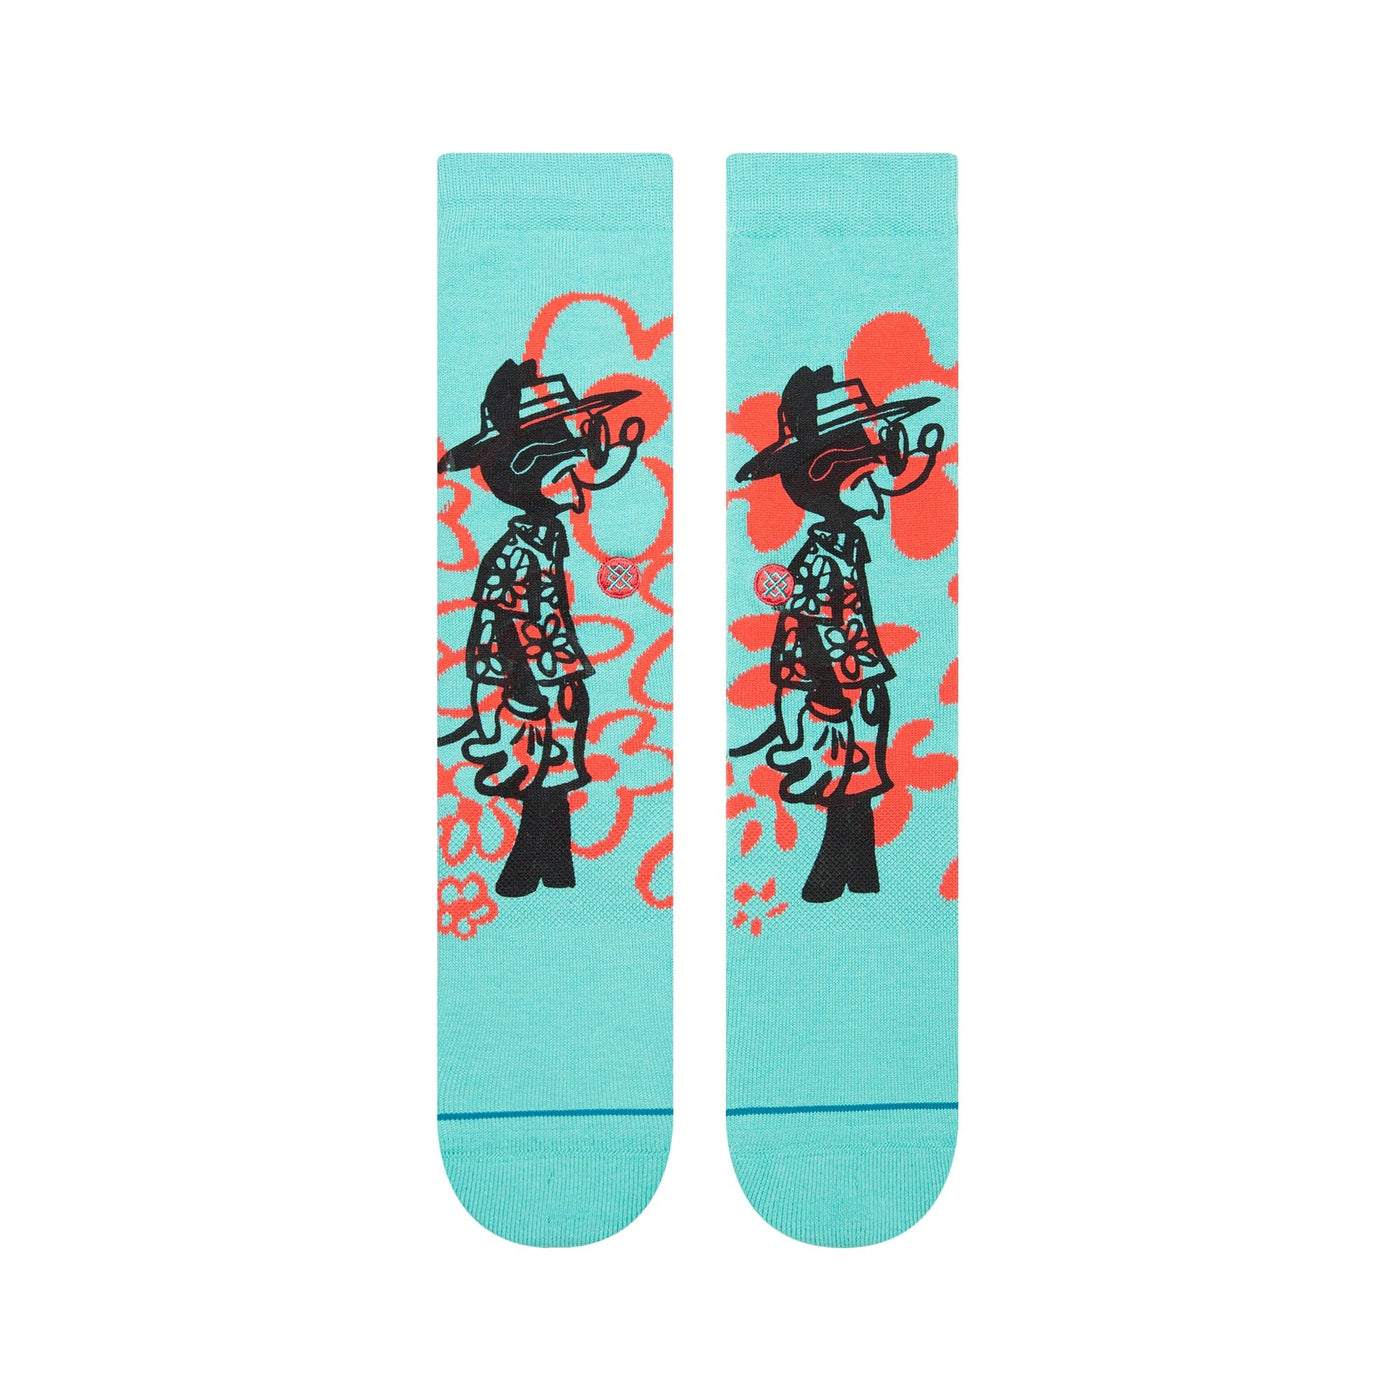 Surf Check By Russ Crew Socks | Men's - Knock Your Socks Off